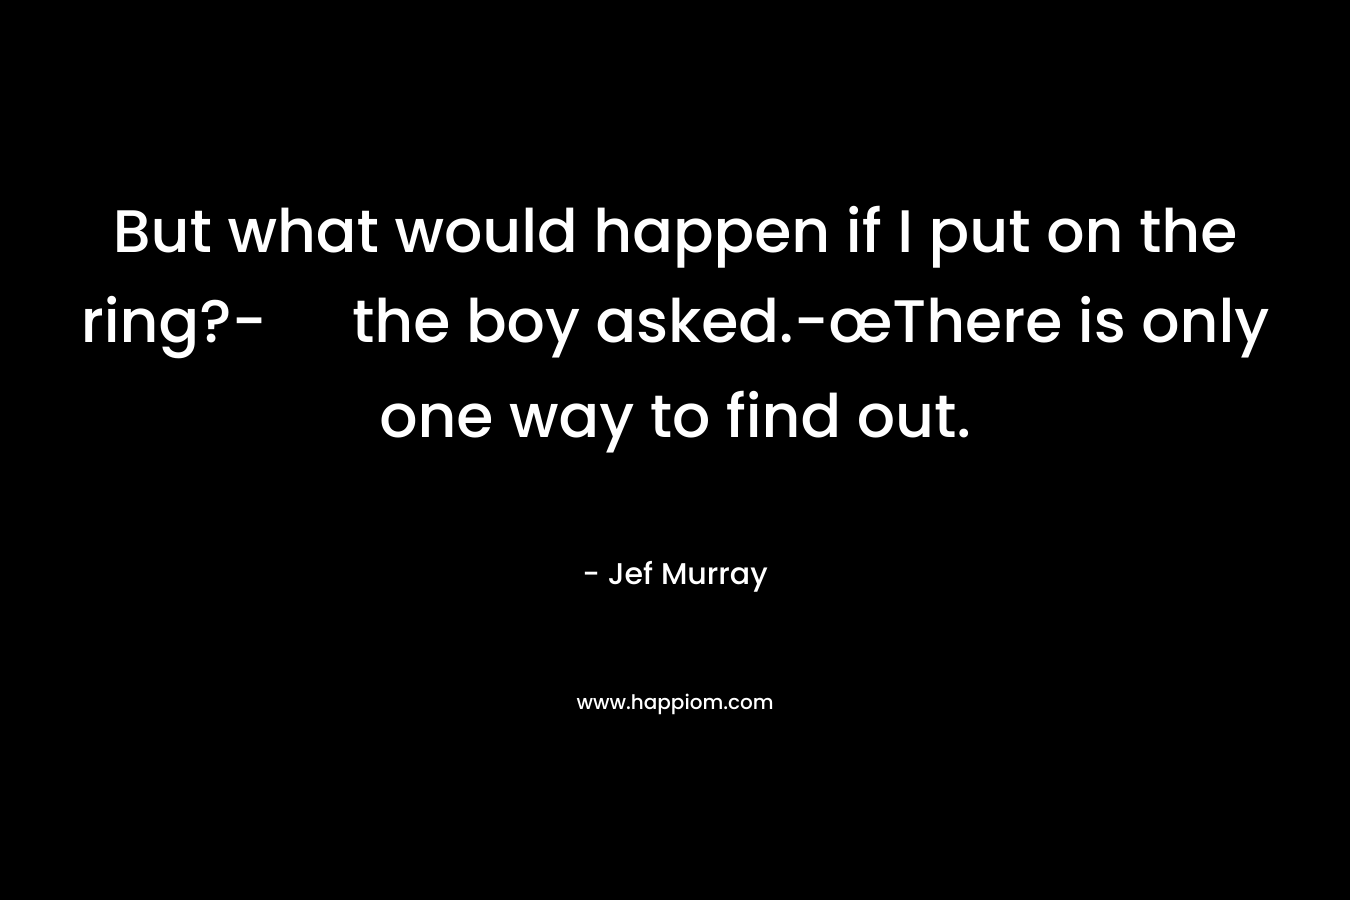 But what would happen if I put on the ring?- the boy asked.-œThere is only one way to find out. – Jef Murray